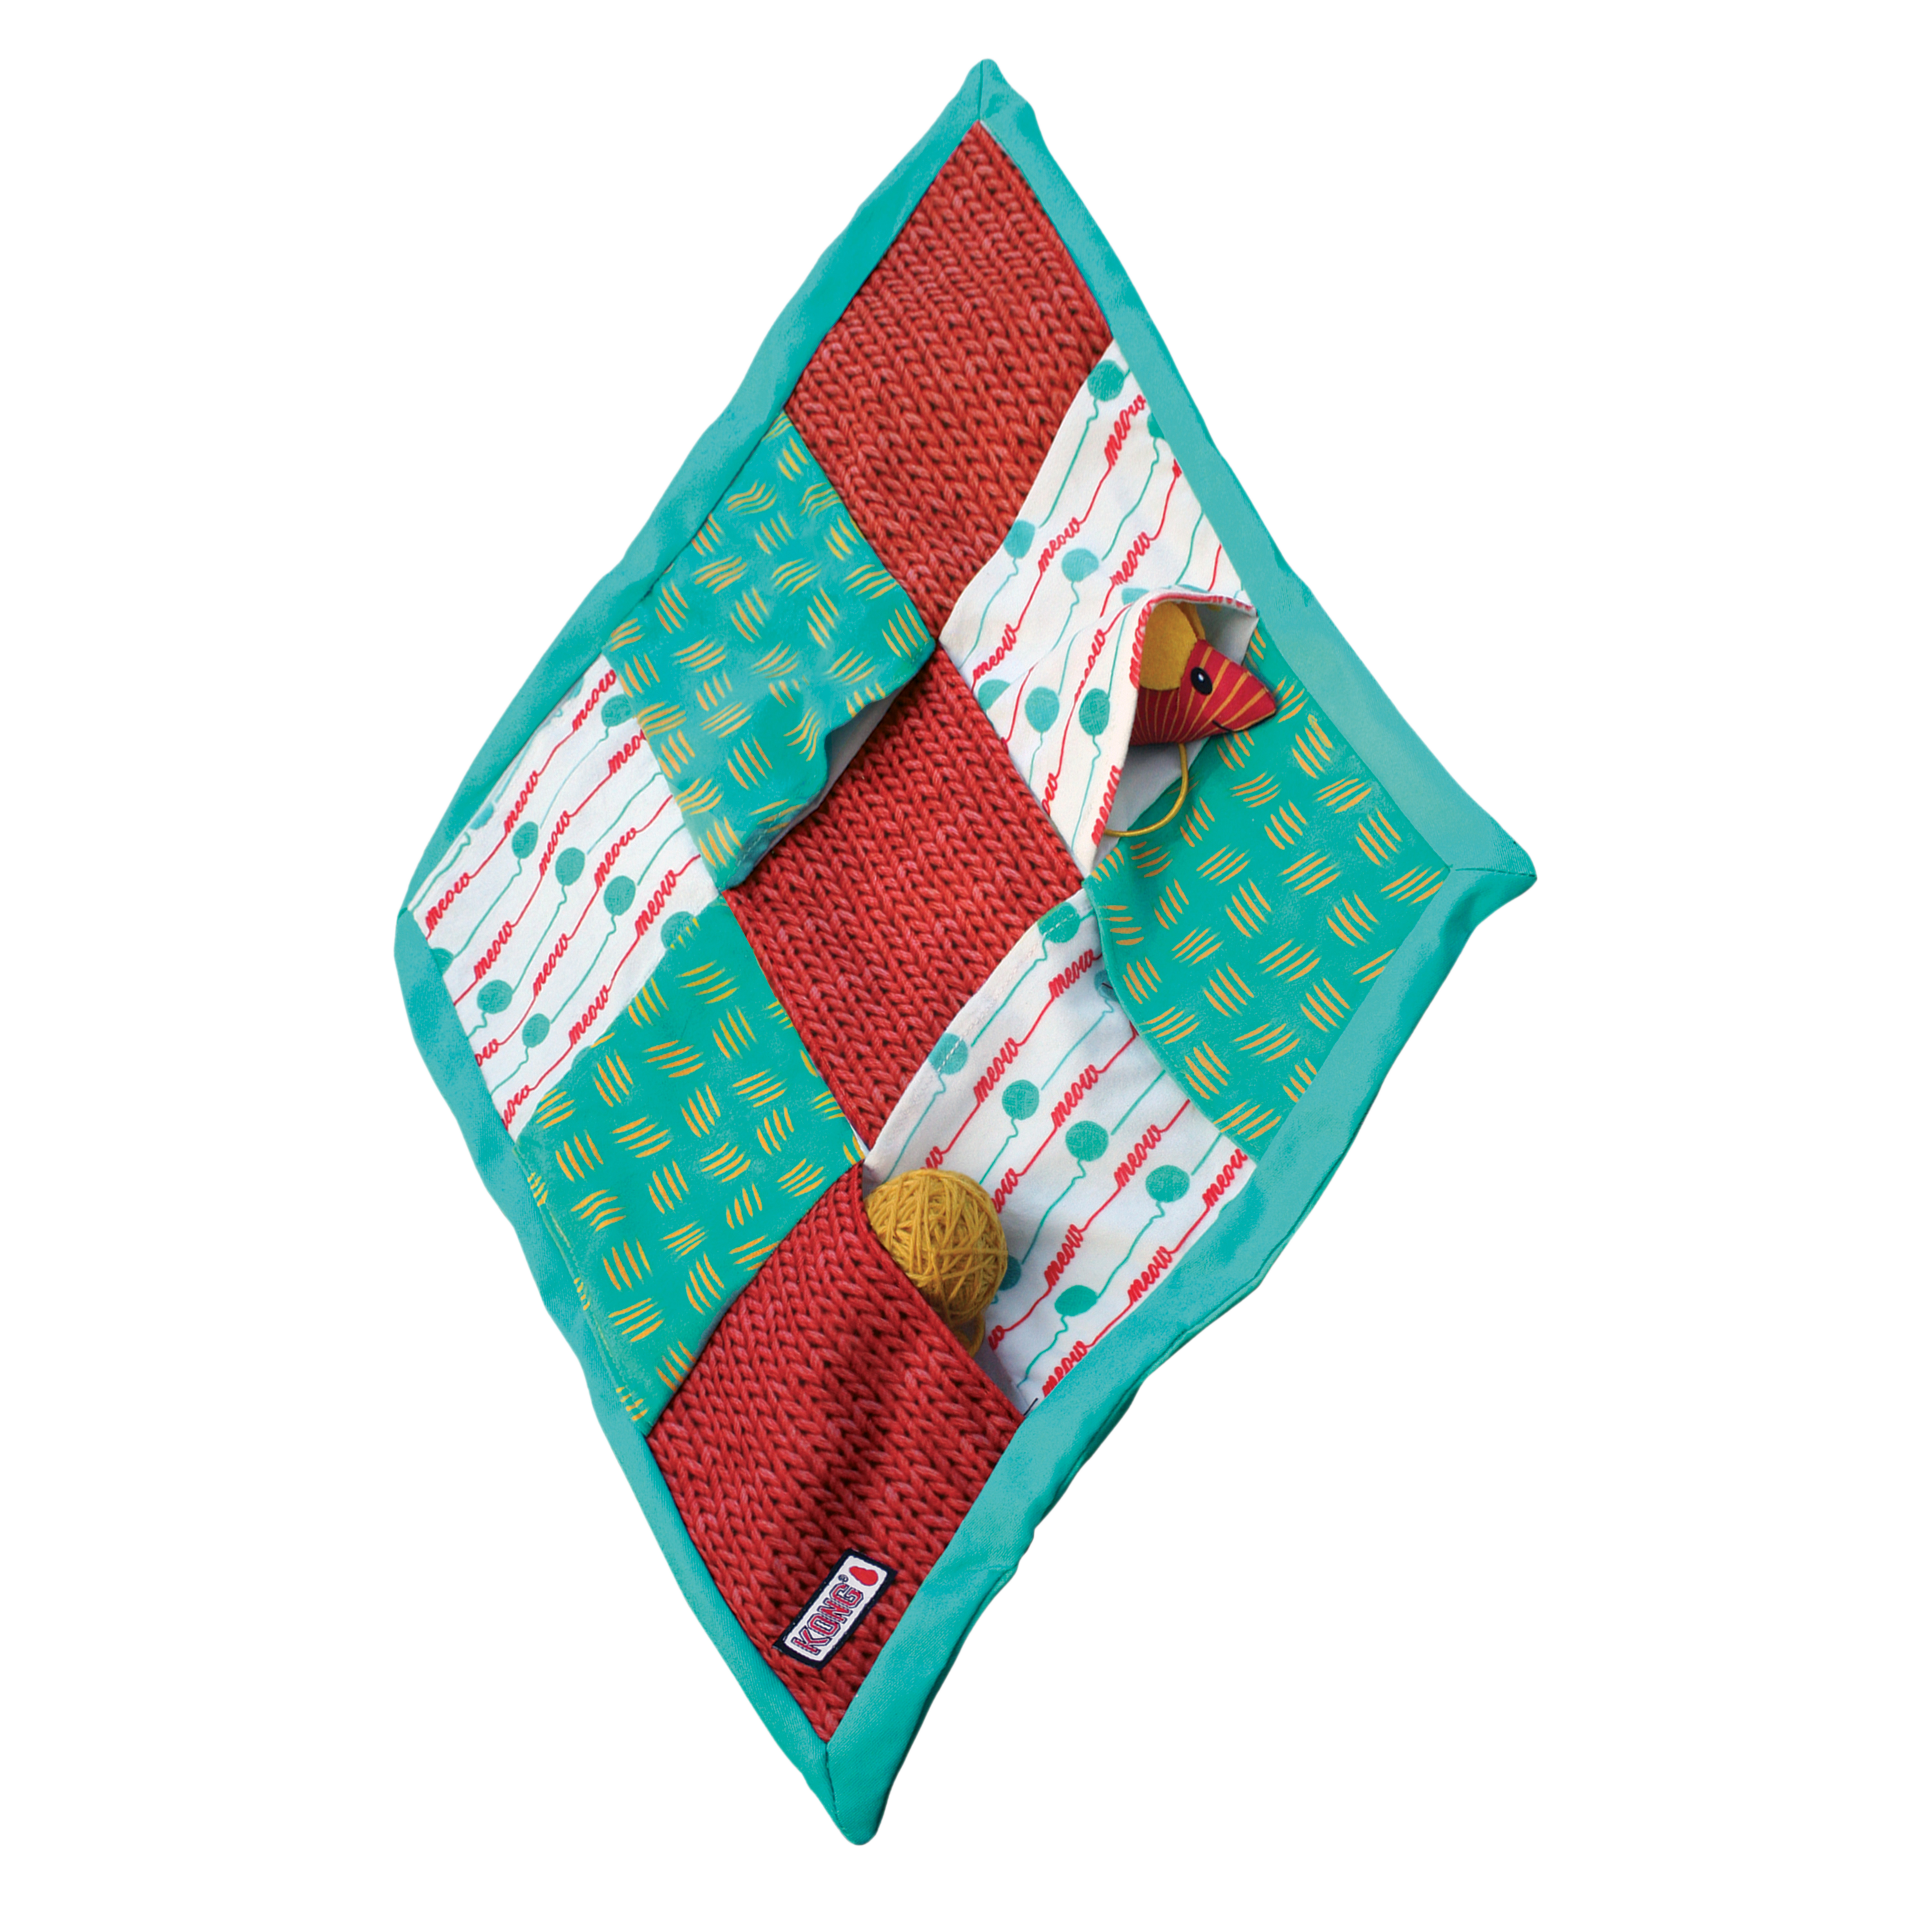 Cat Puzzlements Pockets offpack product image